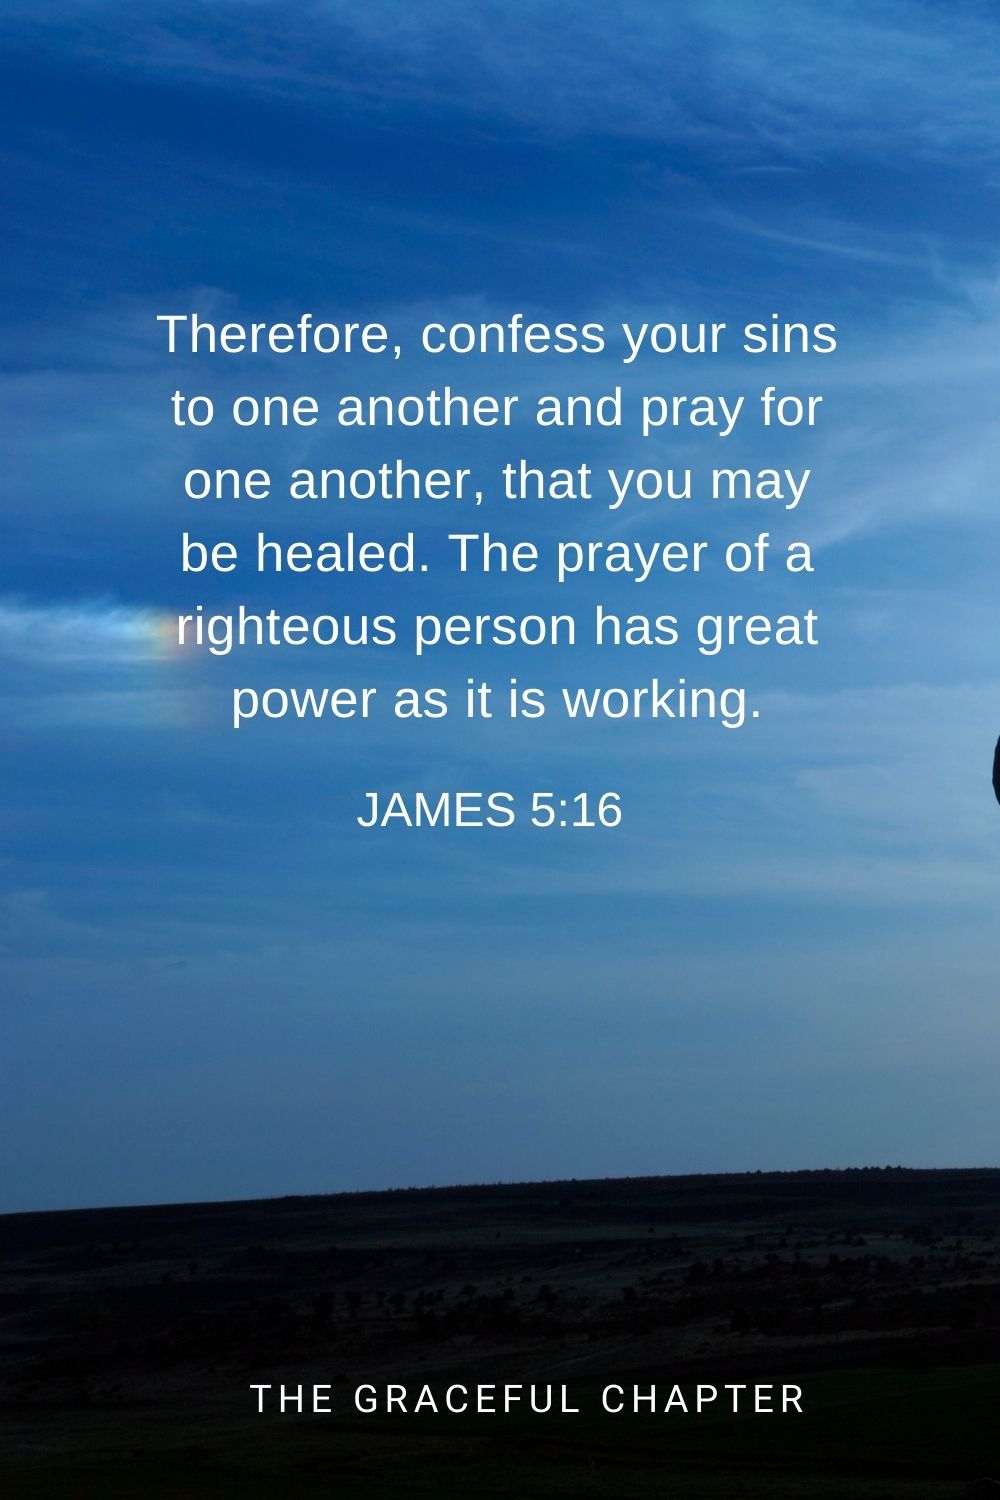 Therefore, confess your sins to one another and pray for one another, that you may be healed. The prayer of a righteous person has great power as it is working. James 5:16